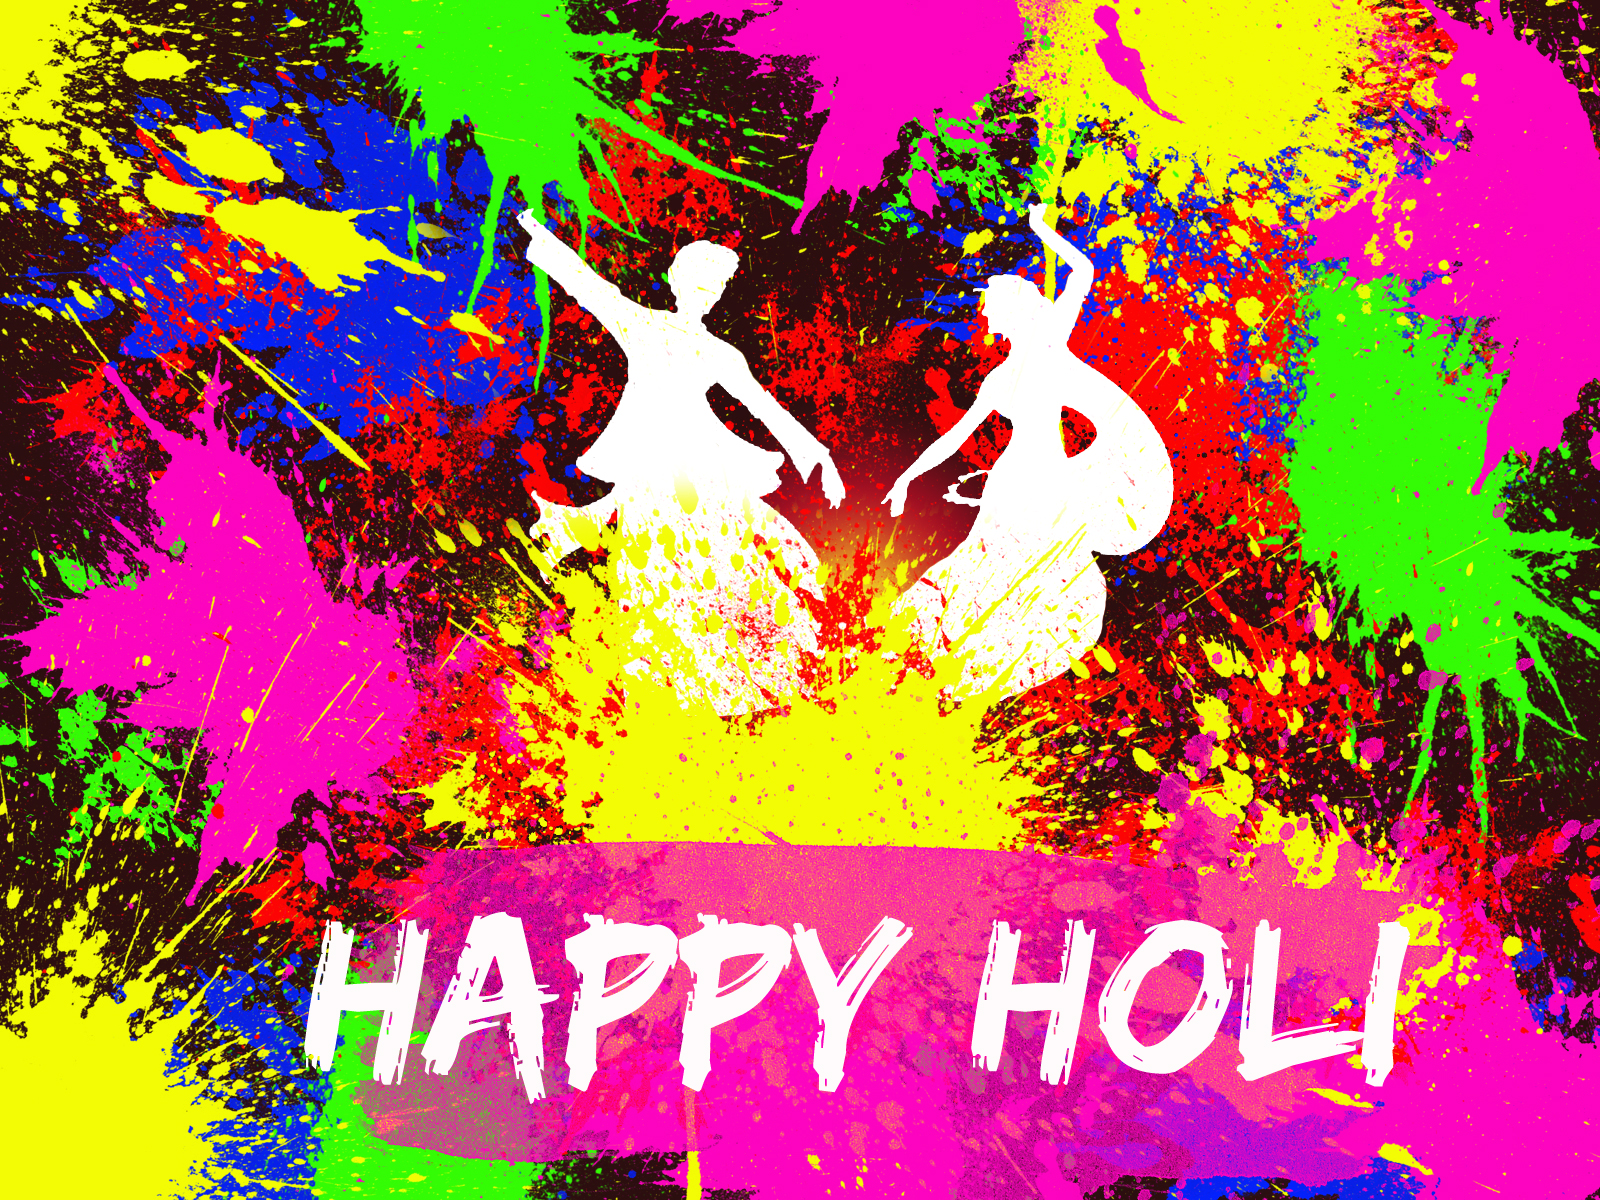 Happy Holi Images Free Download - Happy Holi Images Download , HD Wallpaper & Backgrounds